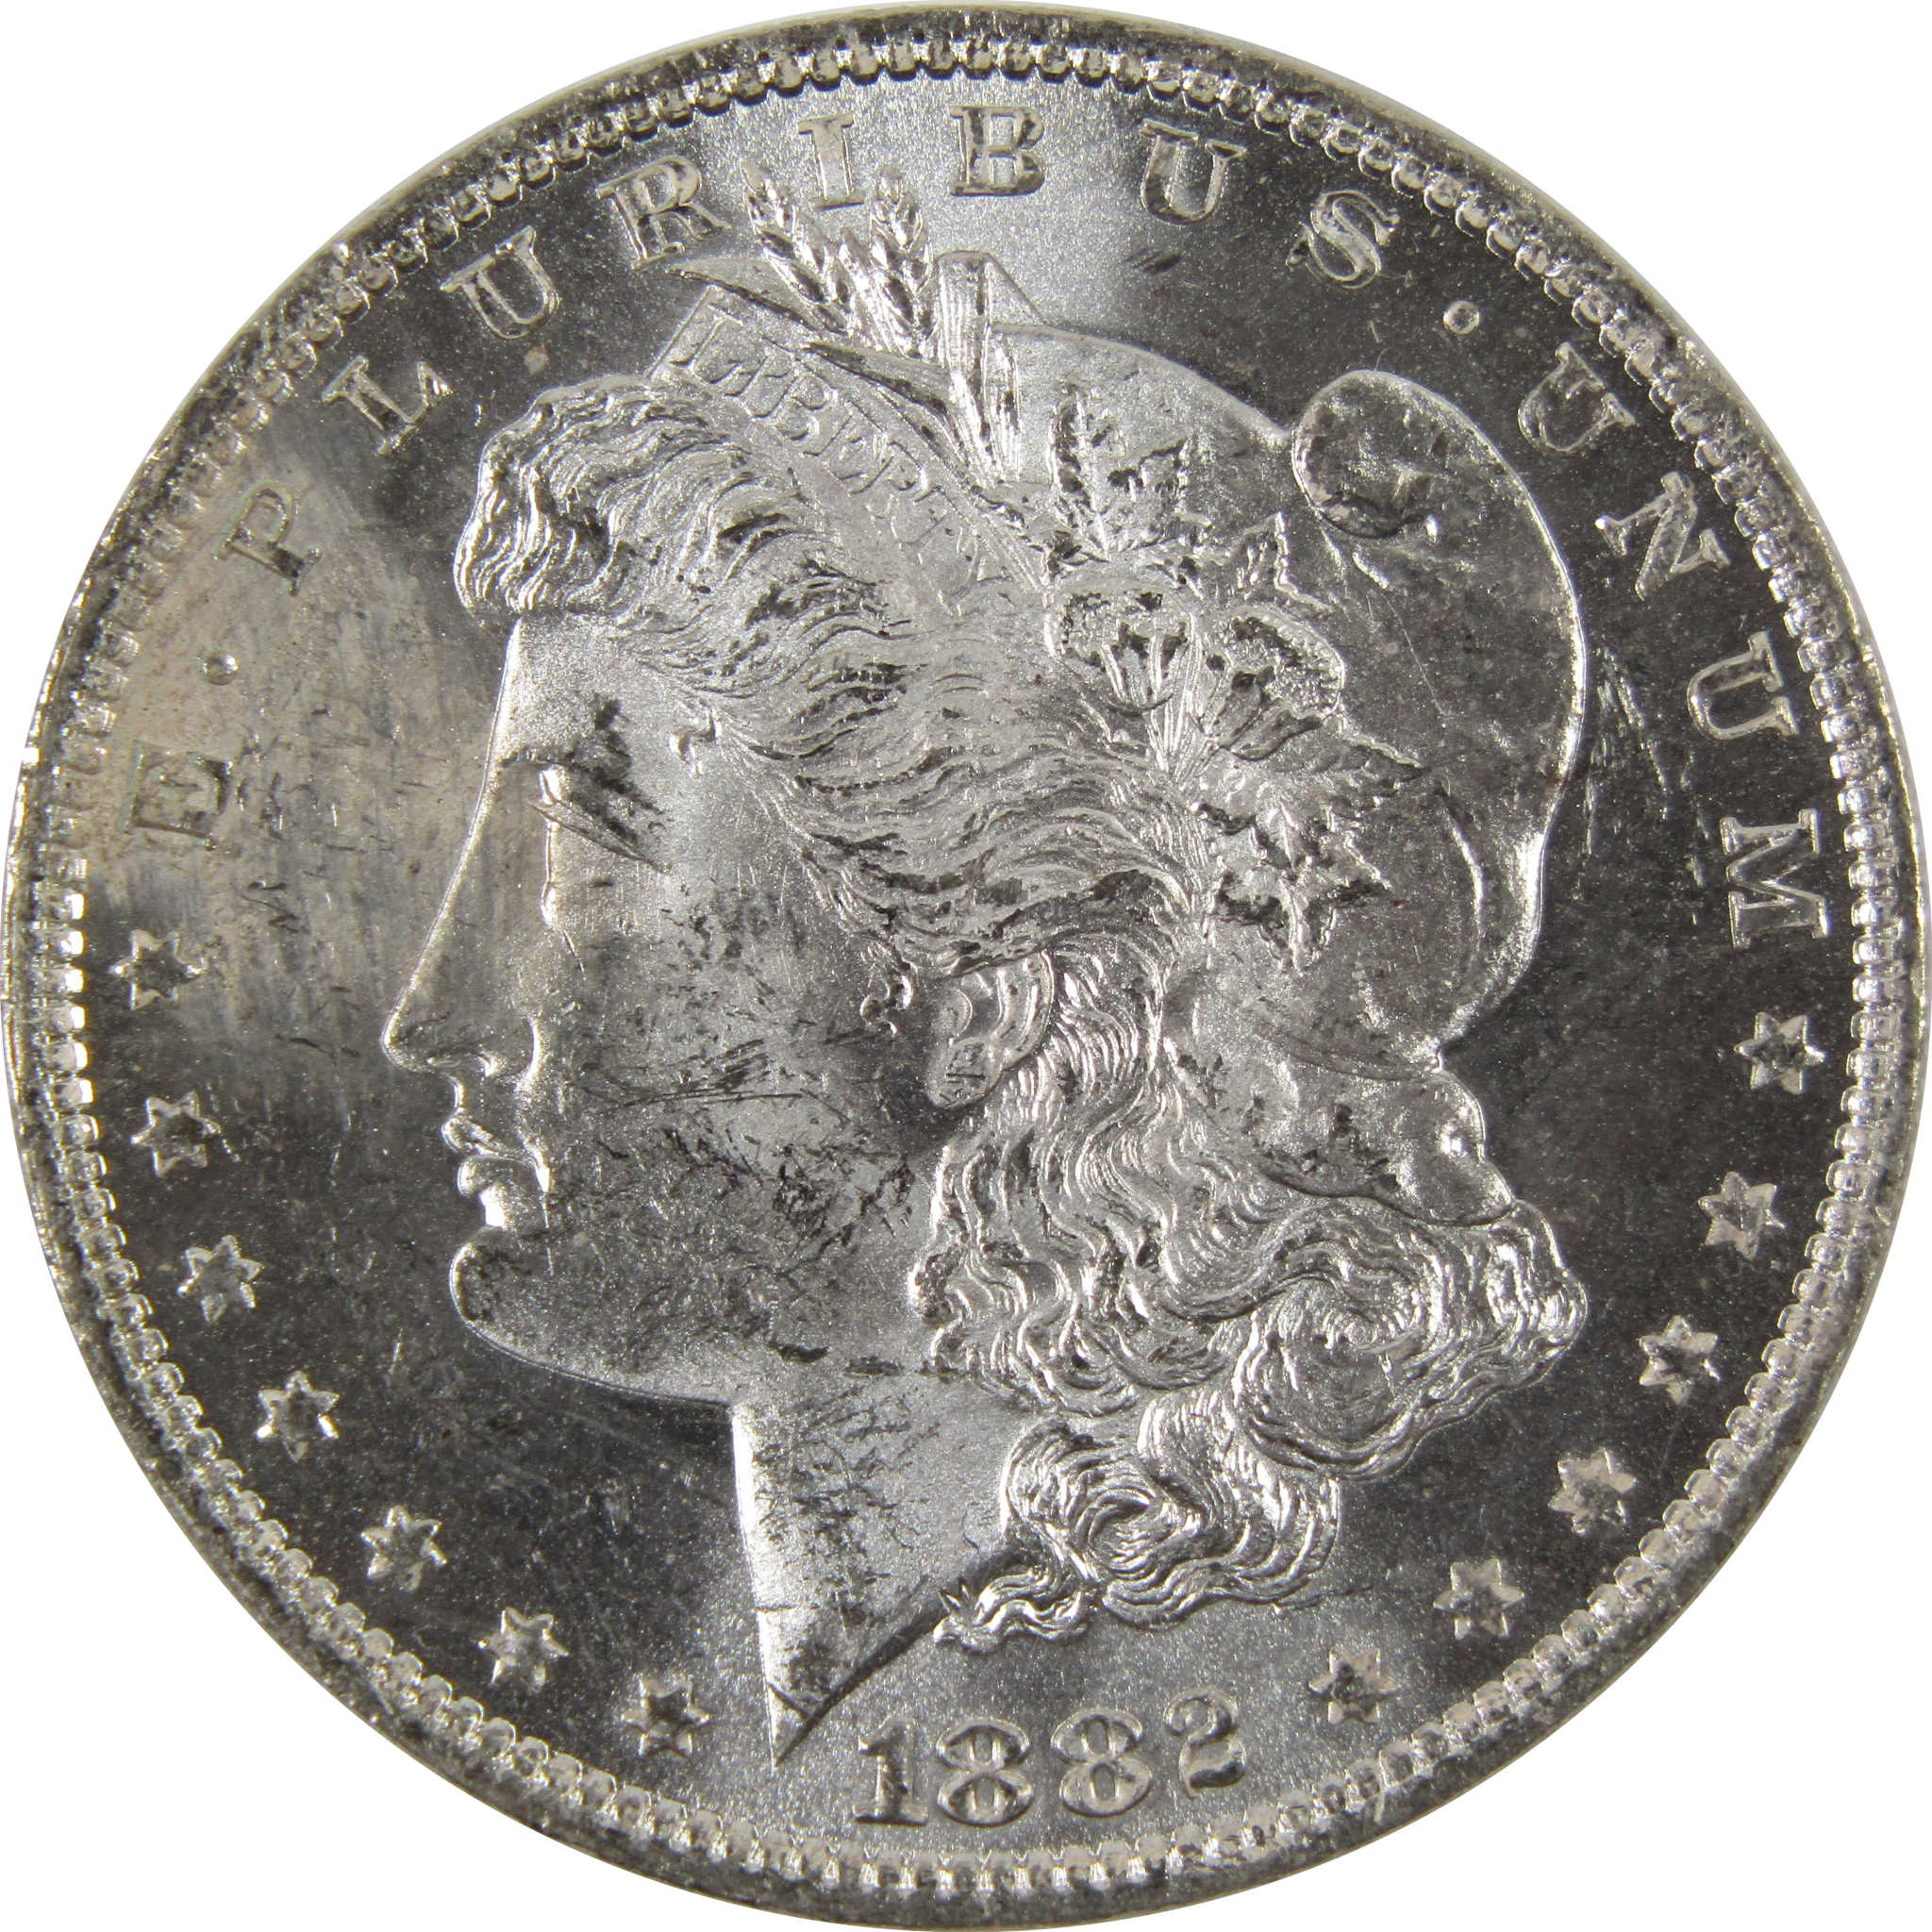 1882 O Morgan Dollar Unc Details 90% Silver $1 Bag Marks SKU:I8794 - Morgan coin - Morgan silver dollar - Morgan silver dollar for sale - Profile Coins &amp; Collectibles